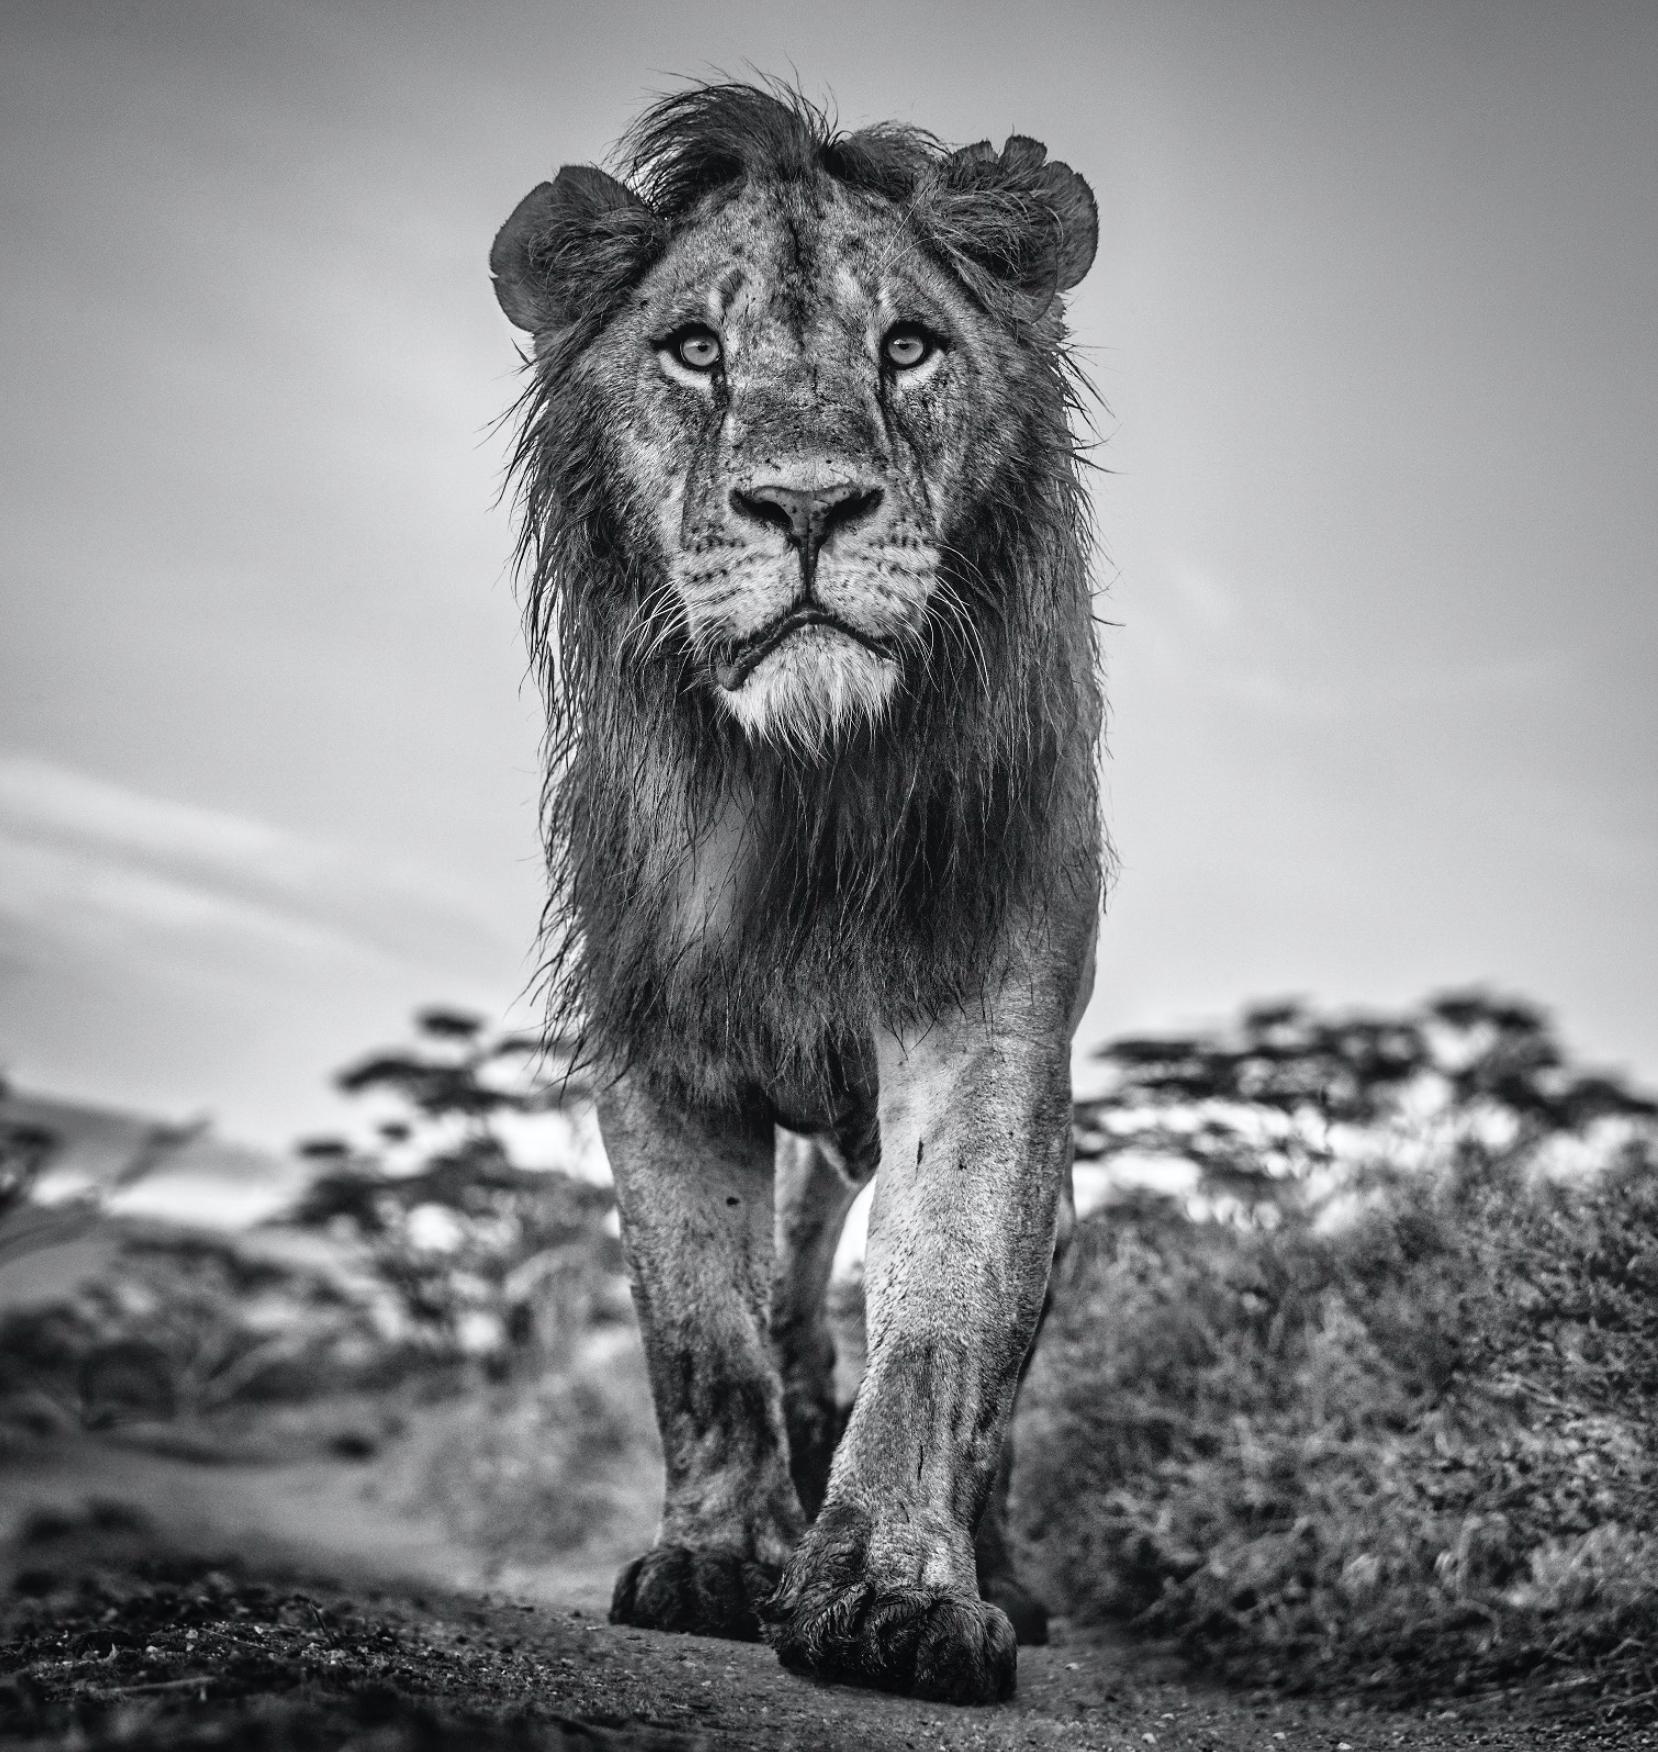 David Yarrow Black and White Photograph - The Morning Show